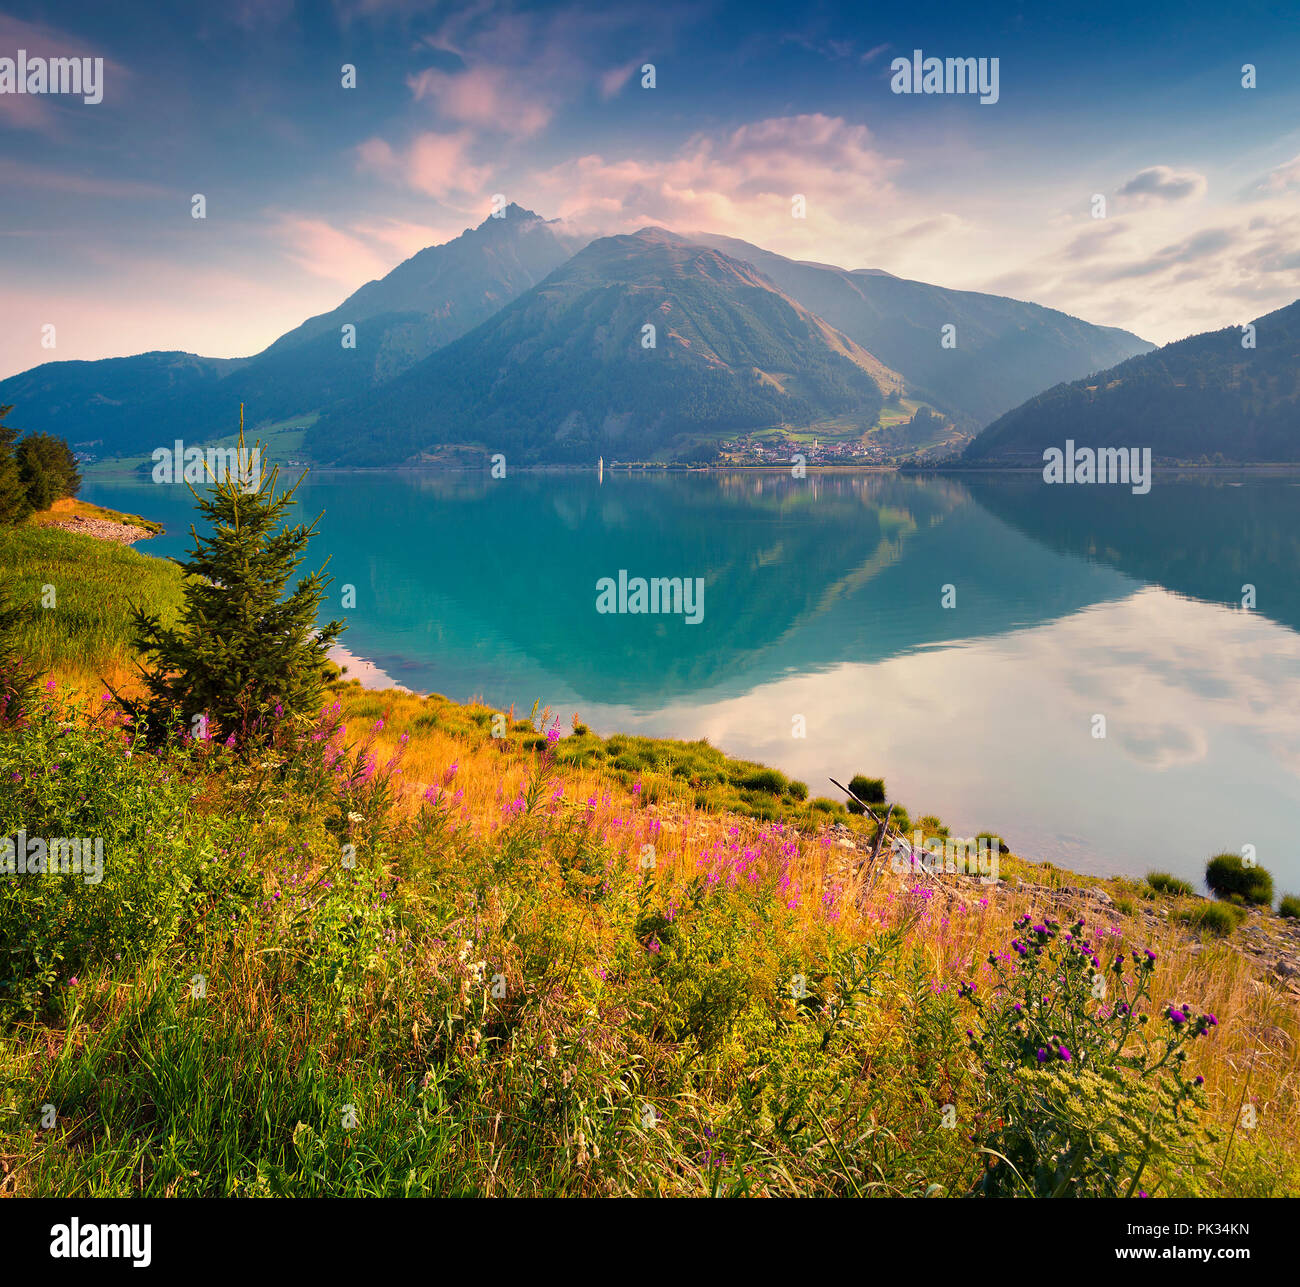 Colorful summer morning in the Resia (Reschensee) lake. Curon Venosta village in the morning mist. Alps, Italy, Europe. Stock Photo